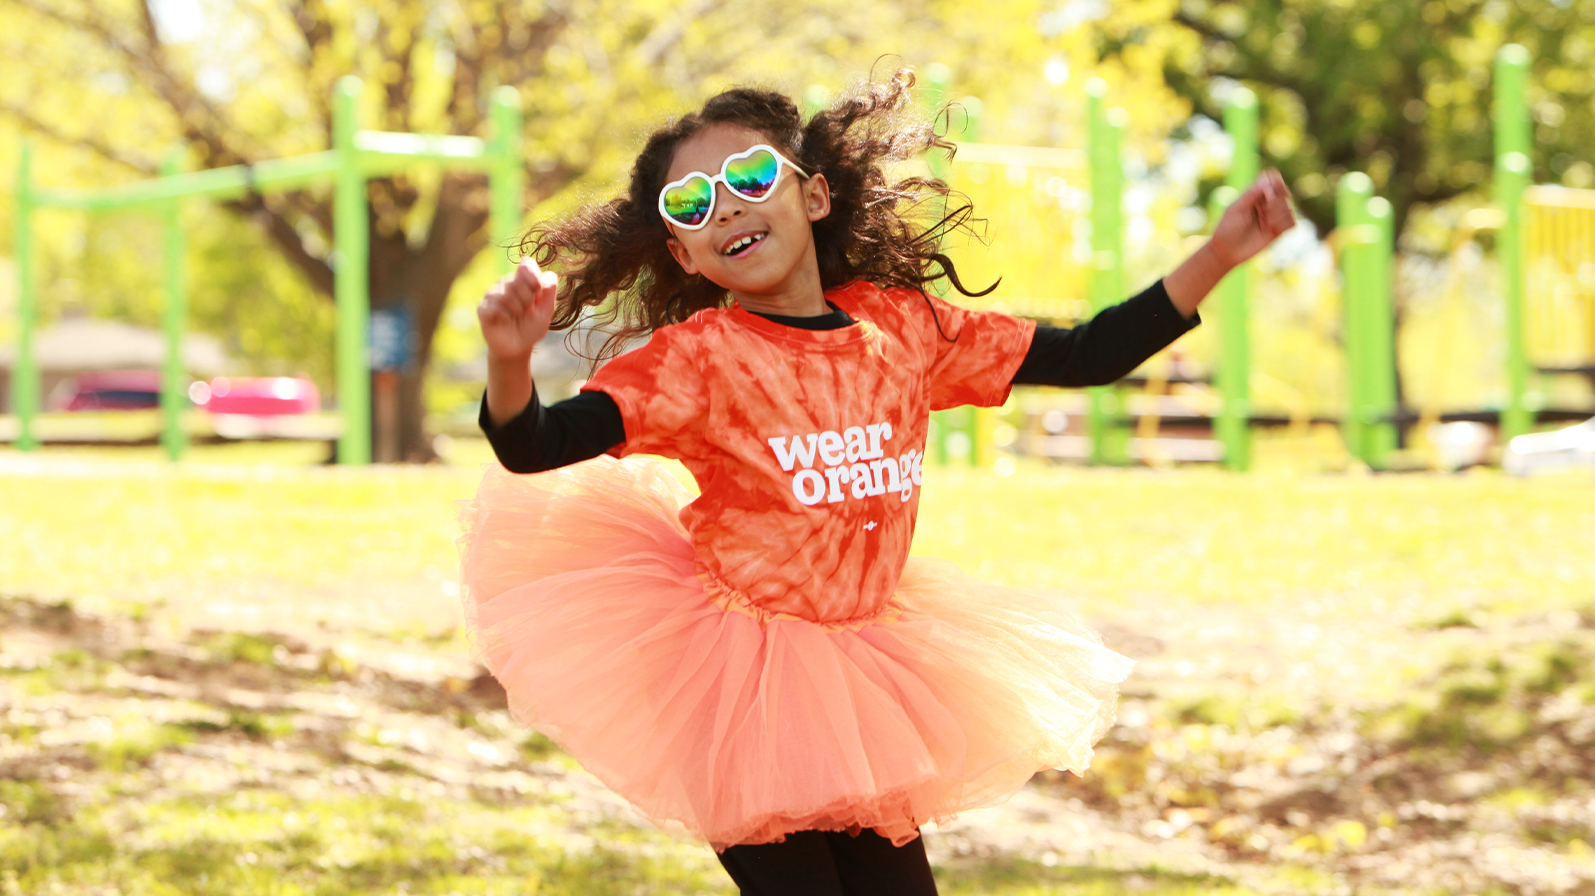 A young girl jumping while wearing a Wear Orange tie-dye shirt